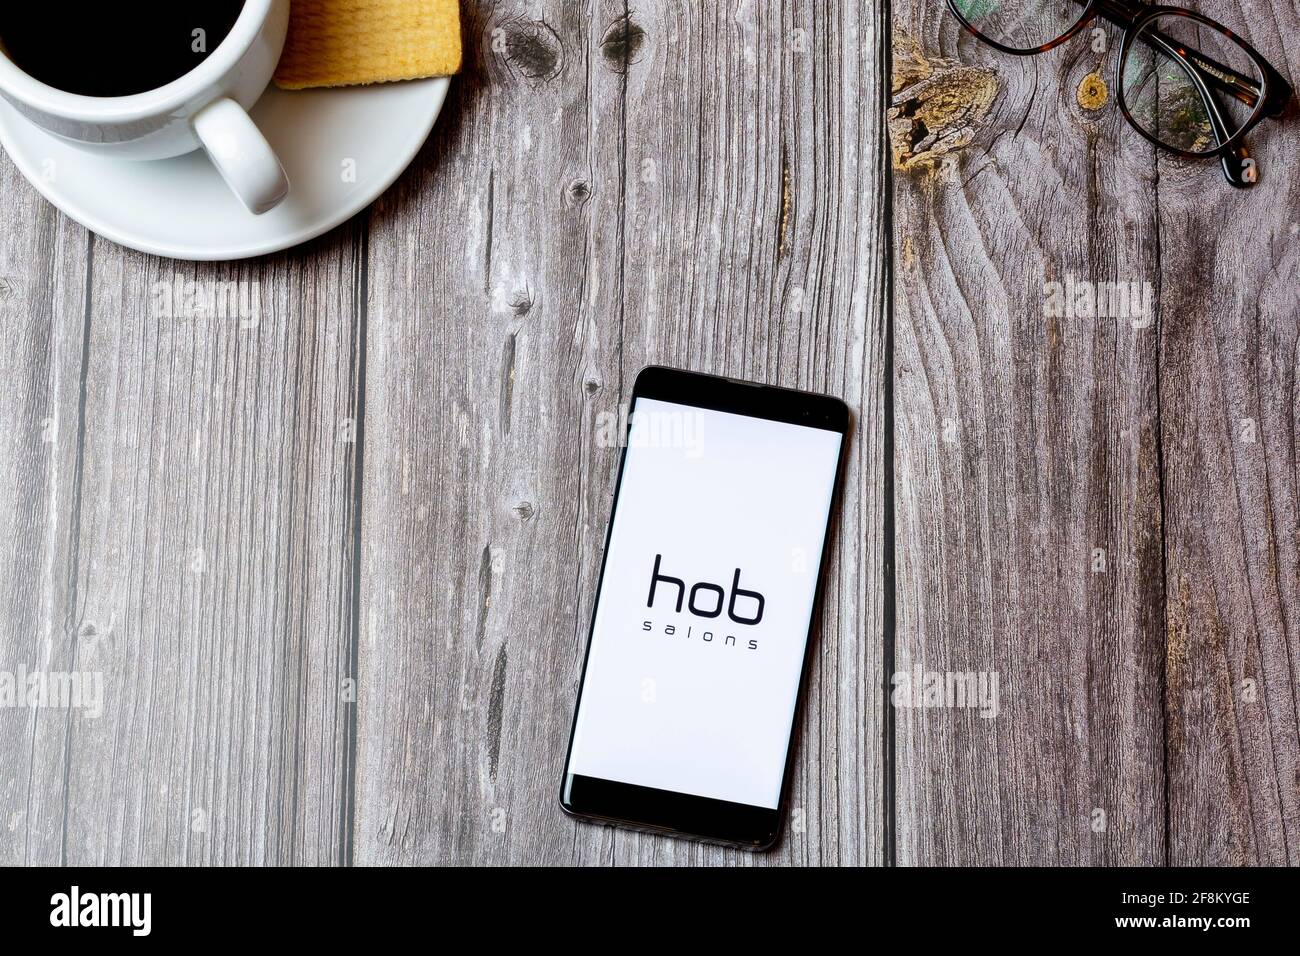 A Mobile phone or cell phone laid on a wooden table showing the hob salons app on screen Stock Photo